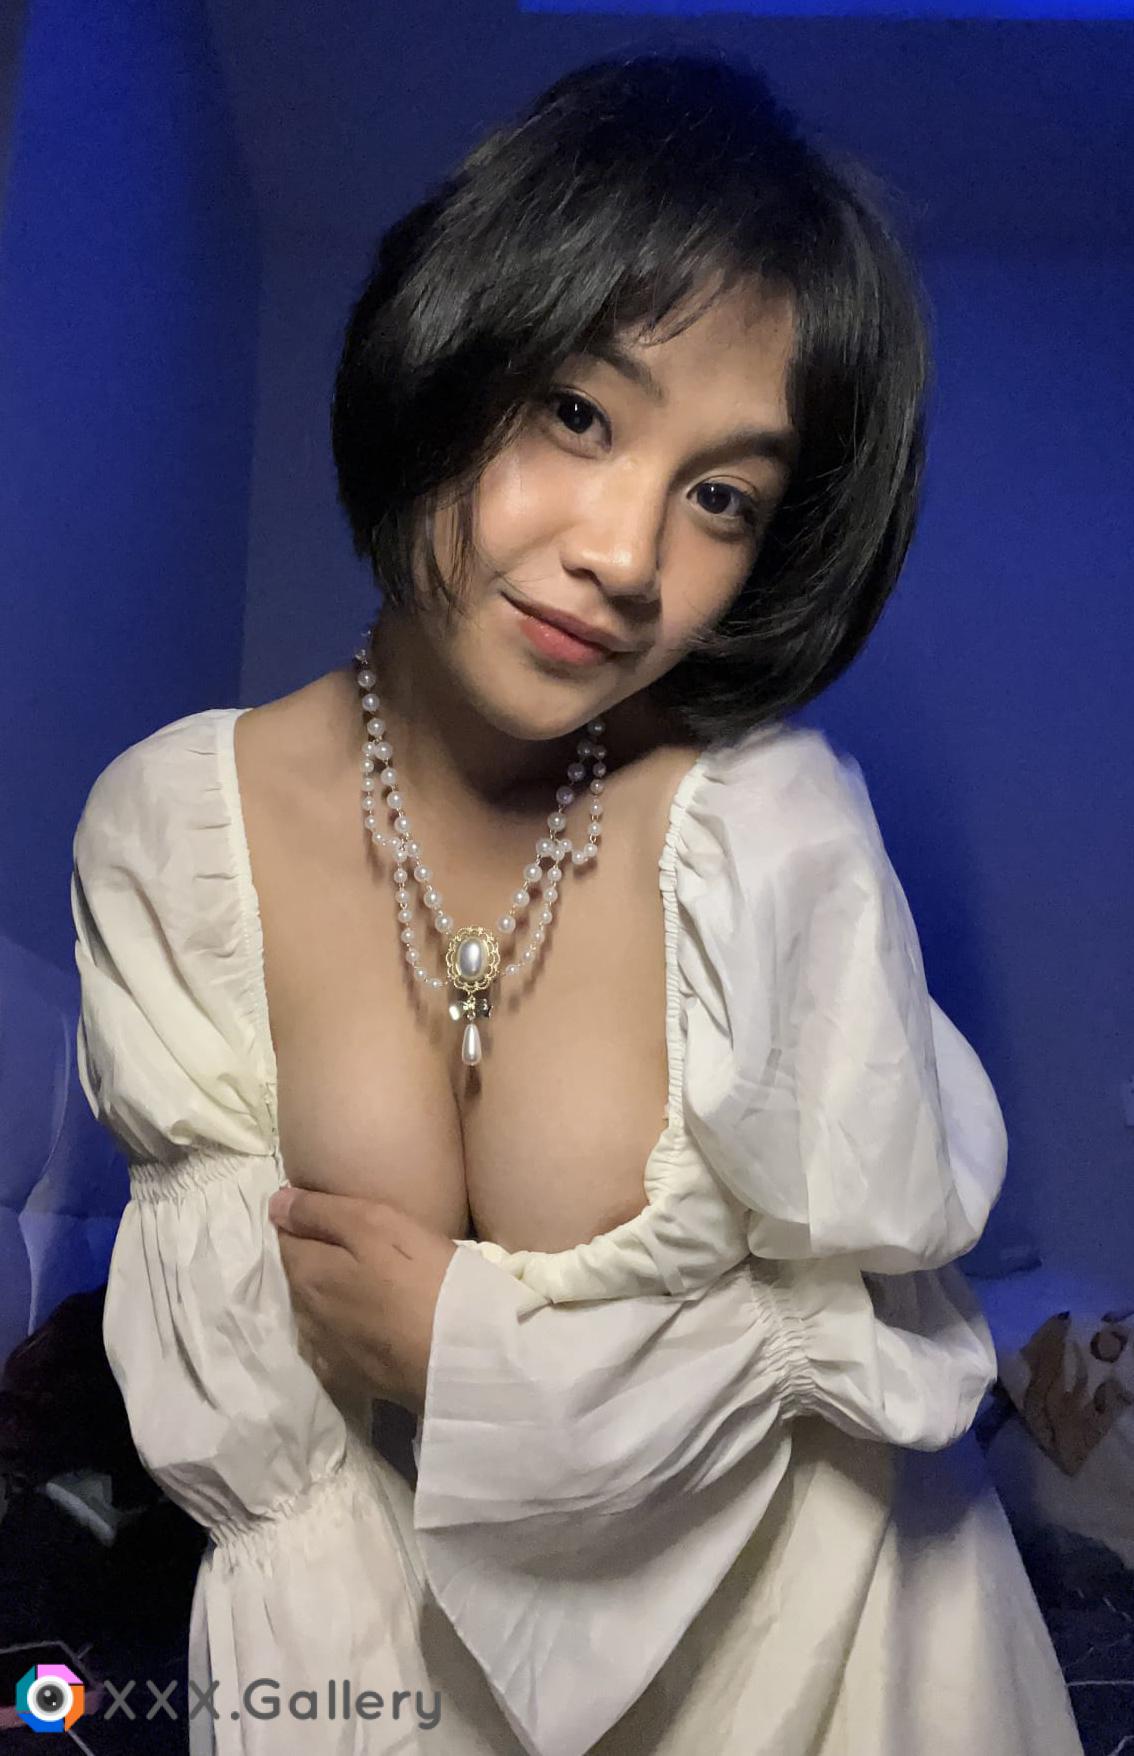 do you like petite asians with big tits